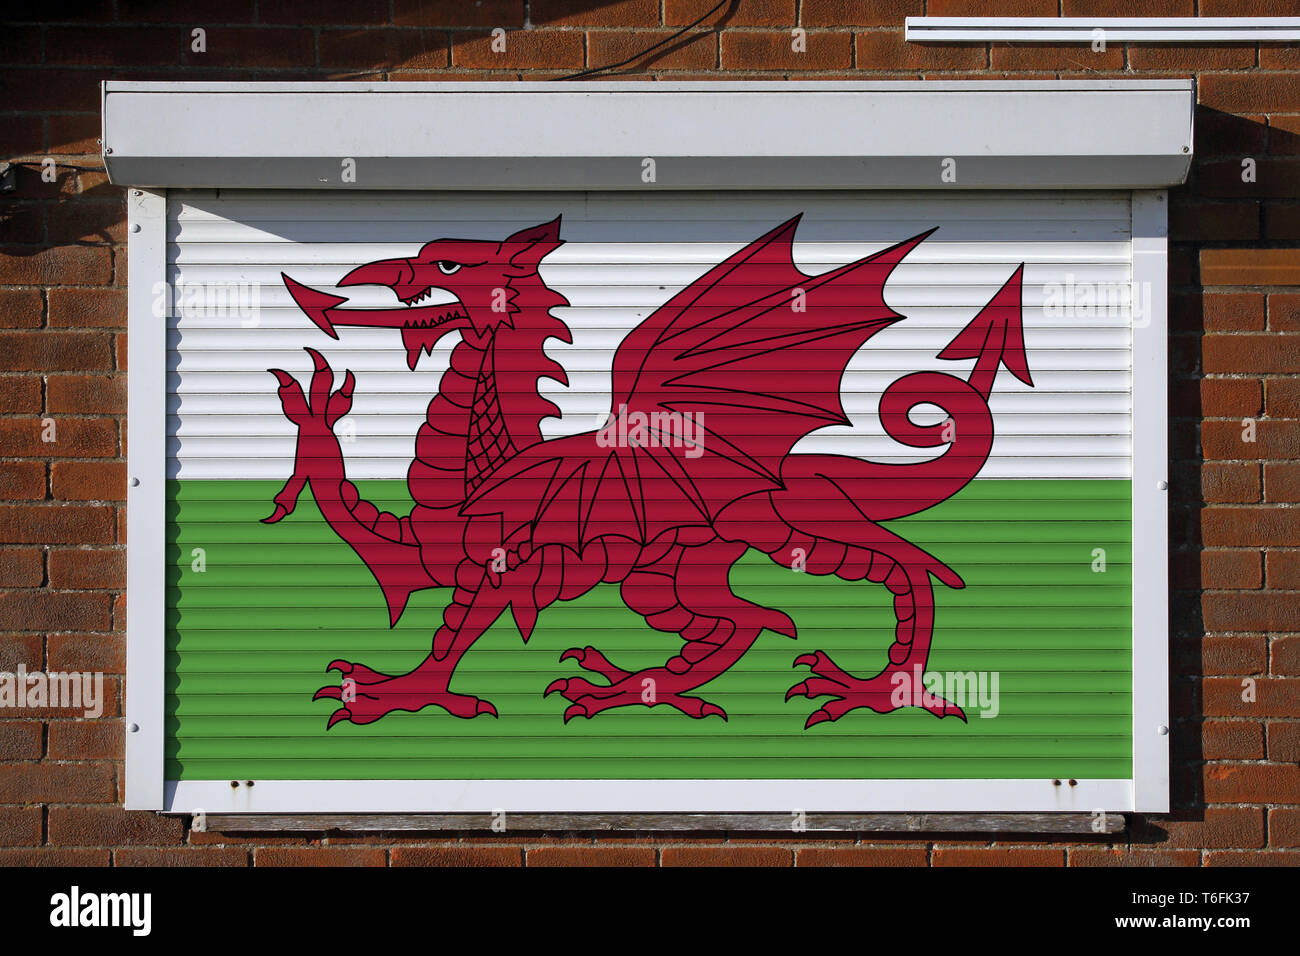 Wales flag on closed security shutters Stock Photo